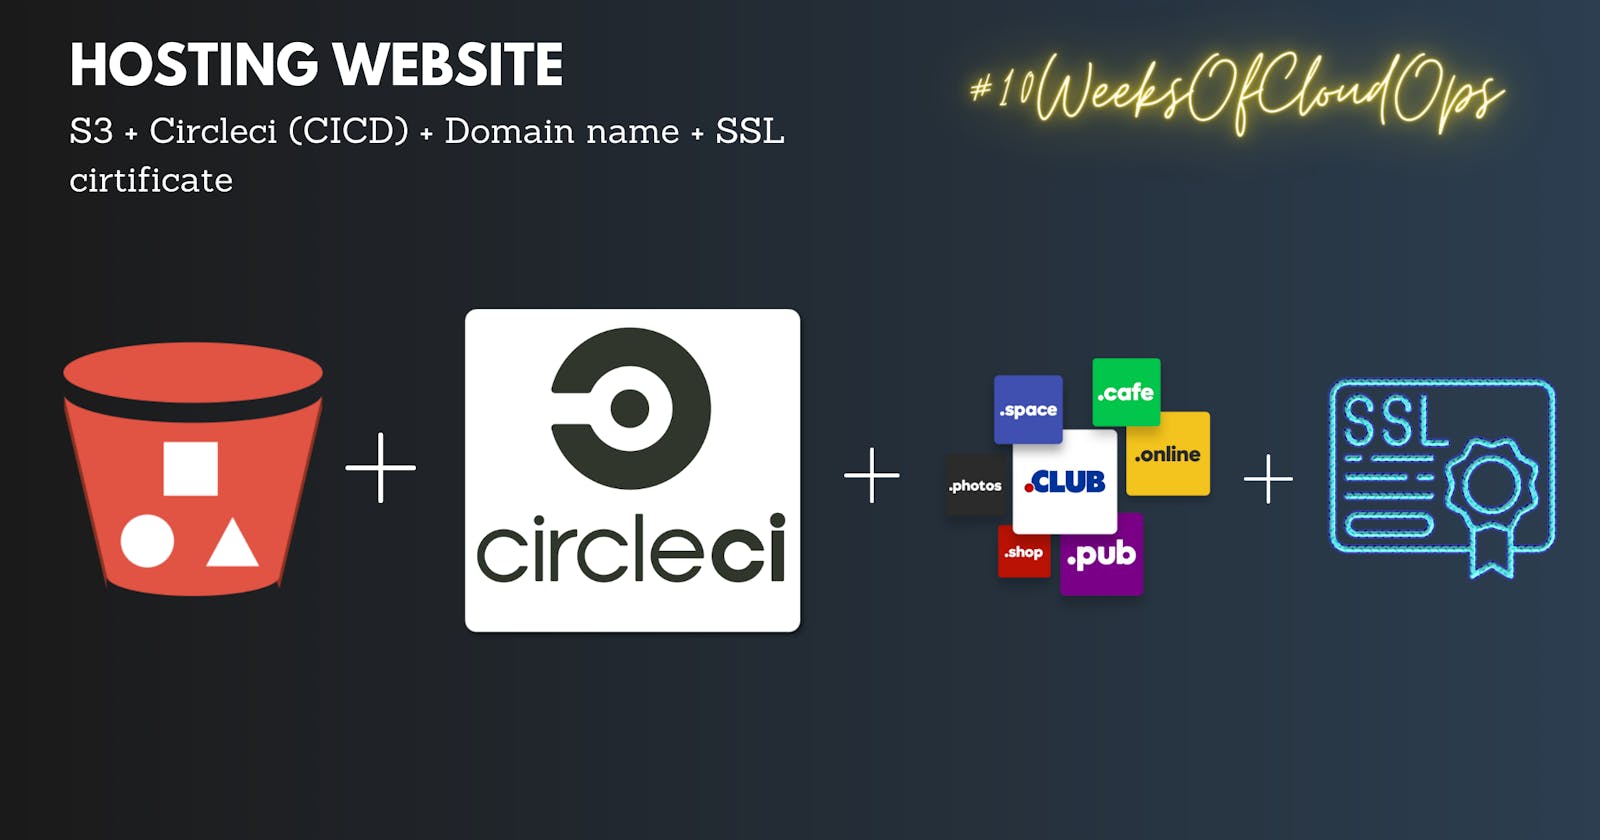 Host your static website on Amazon S3 services + CICD pipeline with the domain name and SSL certificate.  #10WeeksOfCloudOps